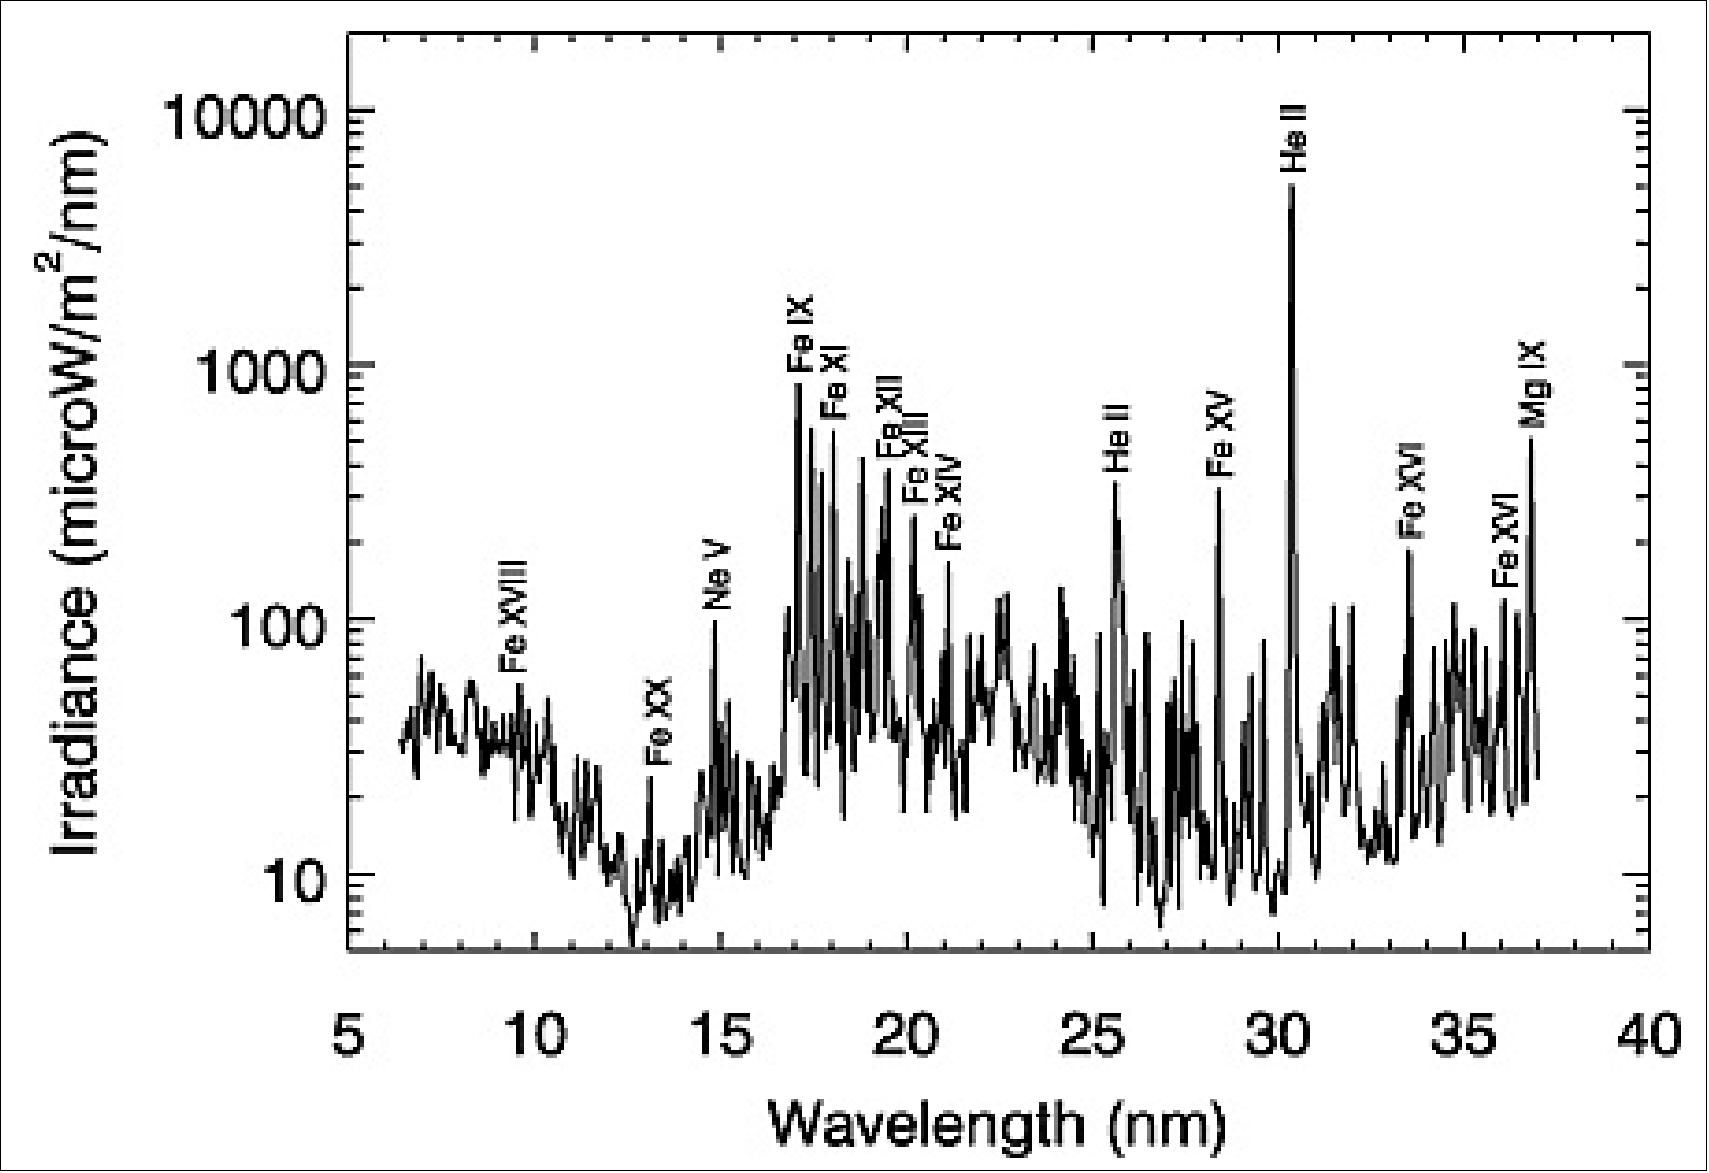 Figure 34: Graph of the EVE spectra showing the total intensity of any given EUV wavelength of light coming off of the sun (image credit: NASA)